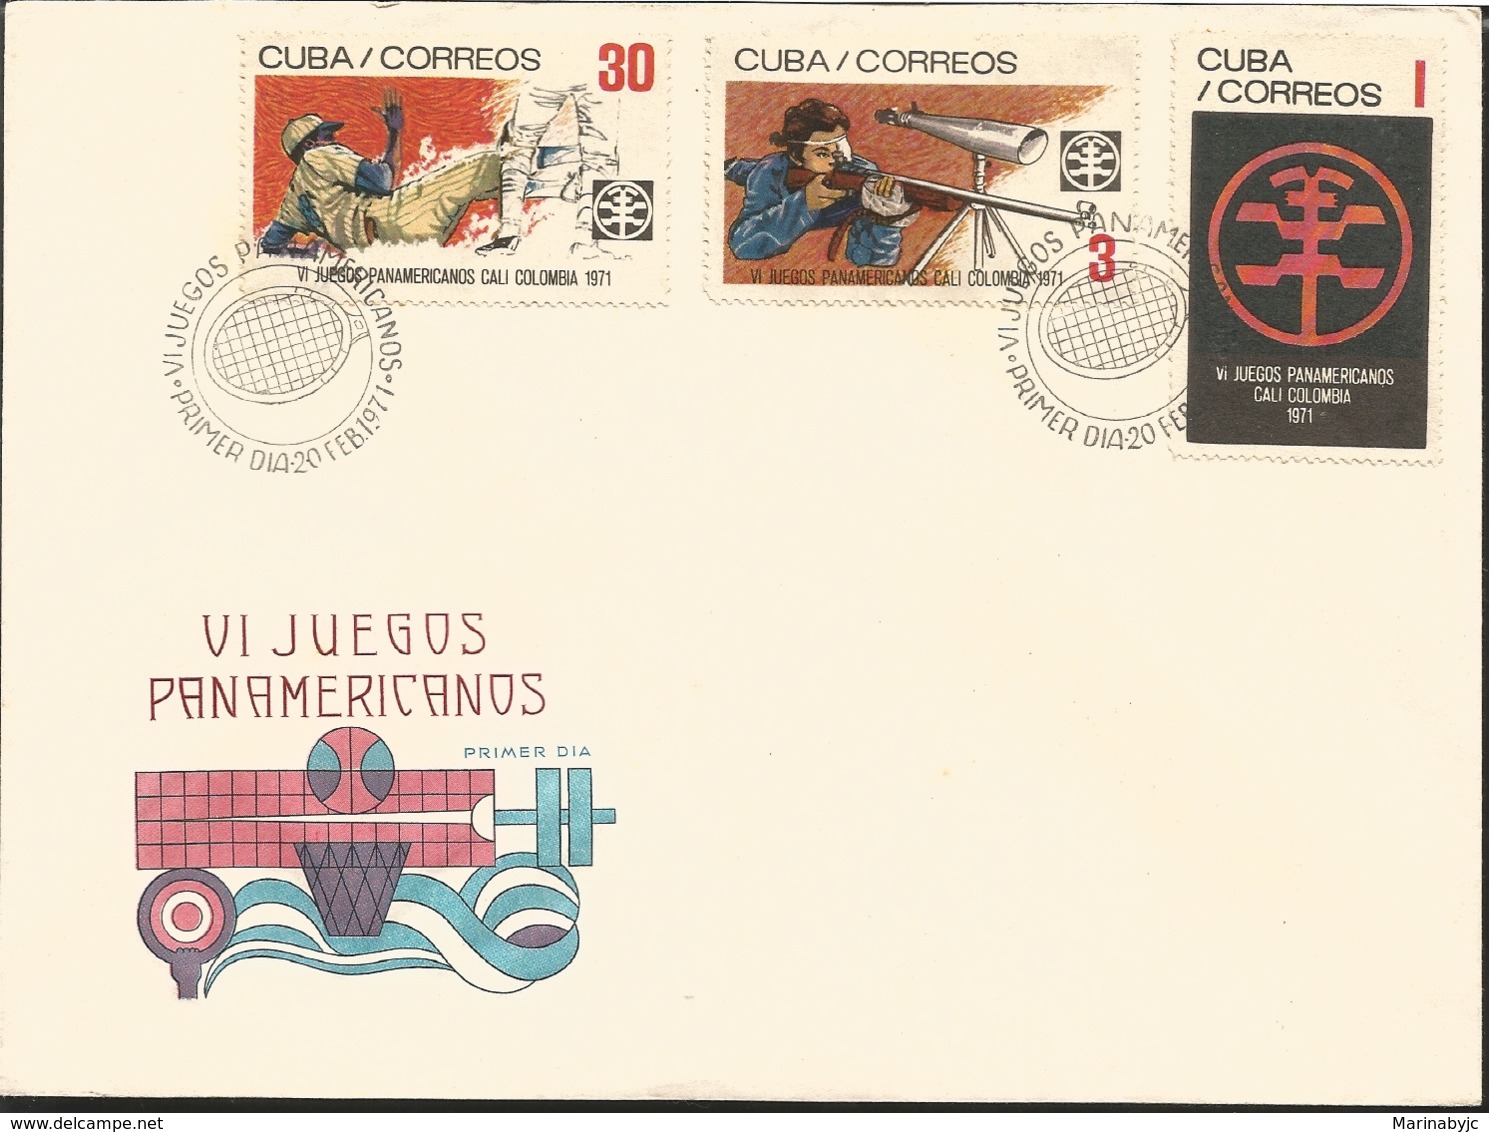 V) 1971 CARIBBEAN, 6TH PAN AMERICAN GAMES, CALI, COLOMBIA, BASEBALL, RIFLE SHOOTING, EMBLEM, WITH SLOGAN CANCELATION IN - Brieven En Documenten